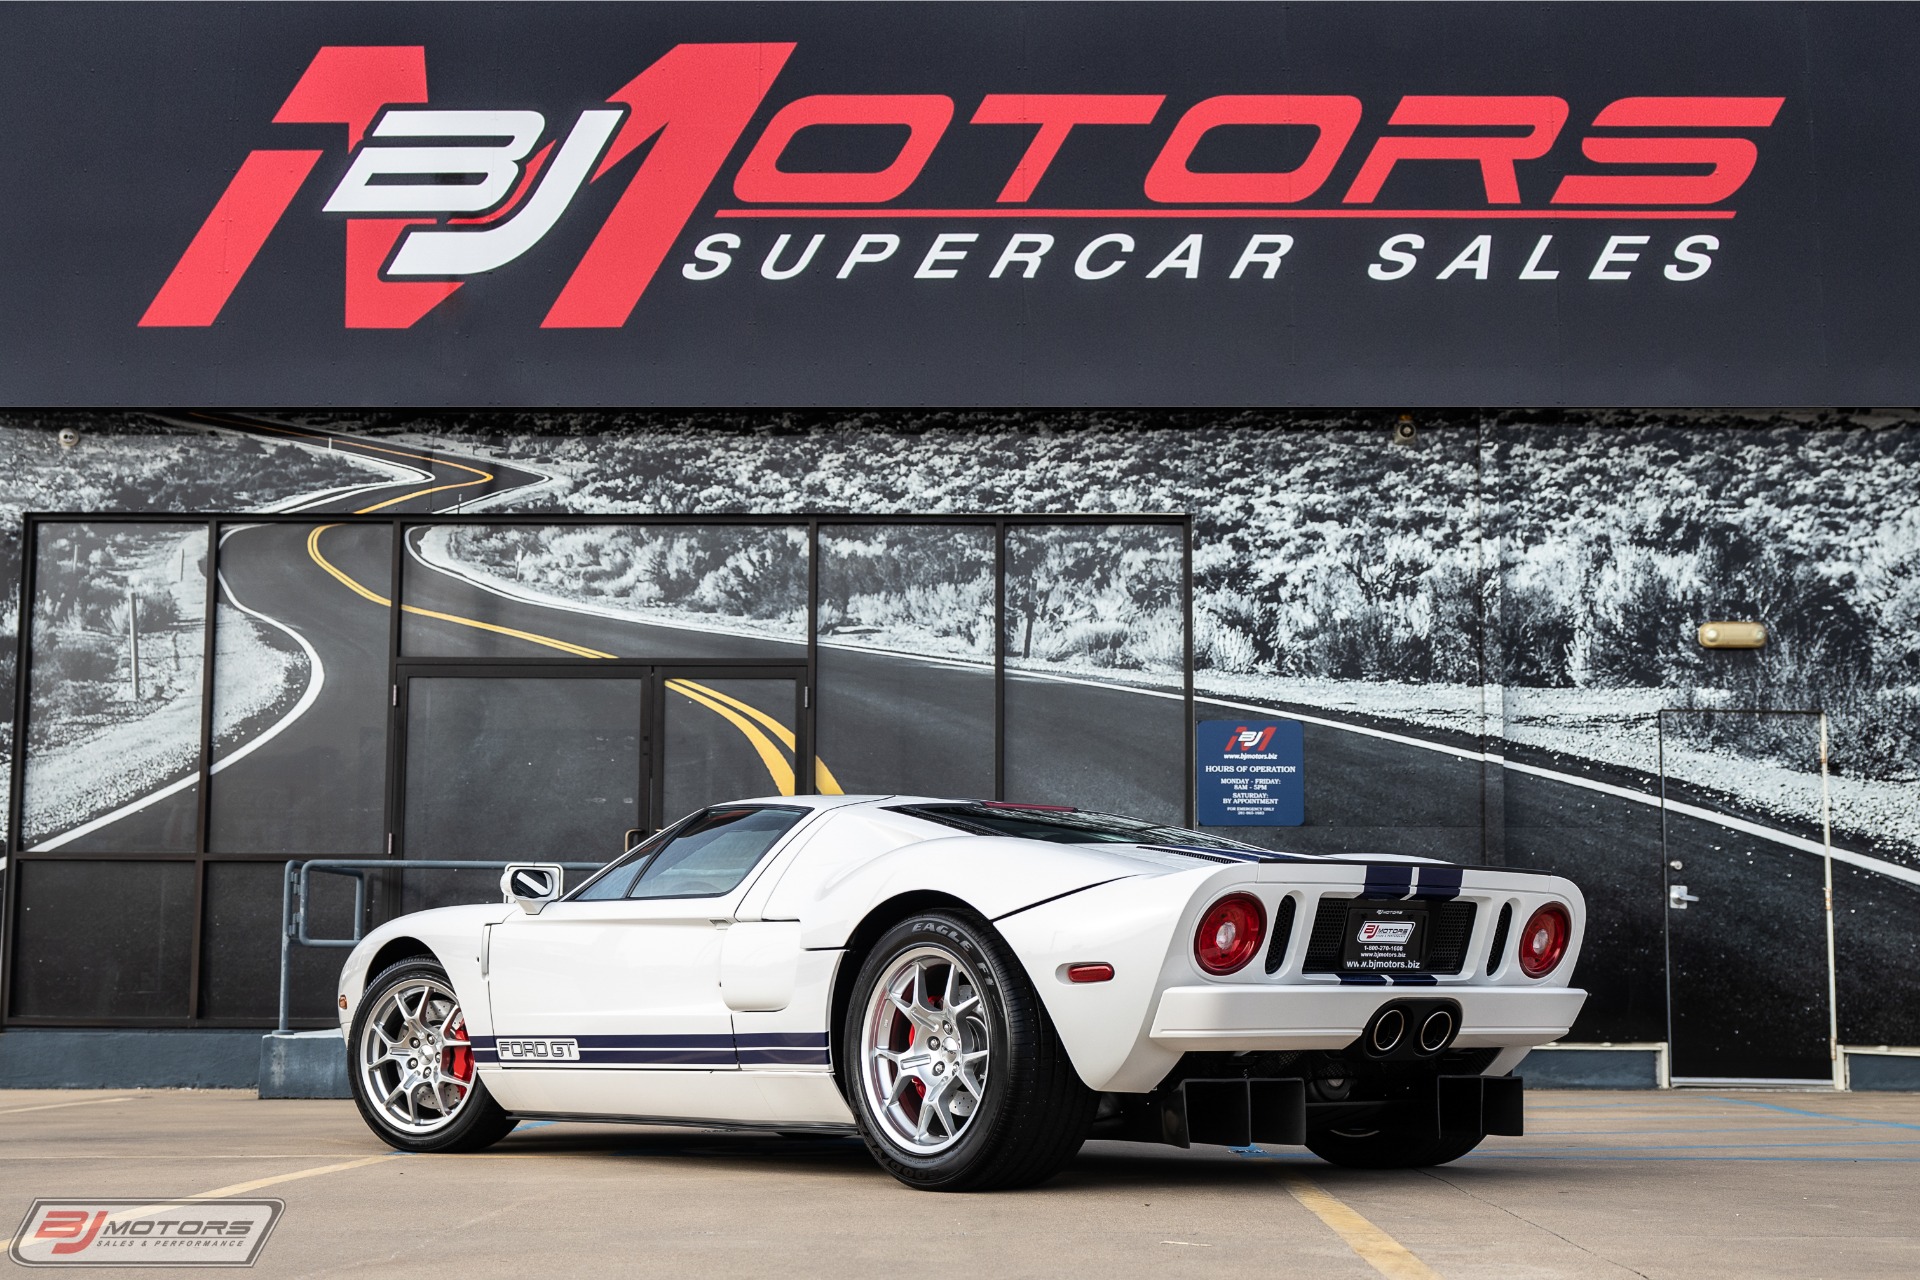 Used 2006 Ford GT Centennial White with Blue Stripes For Sale 